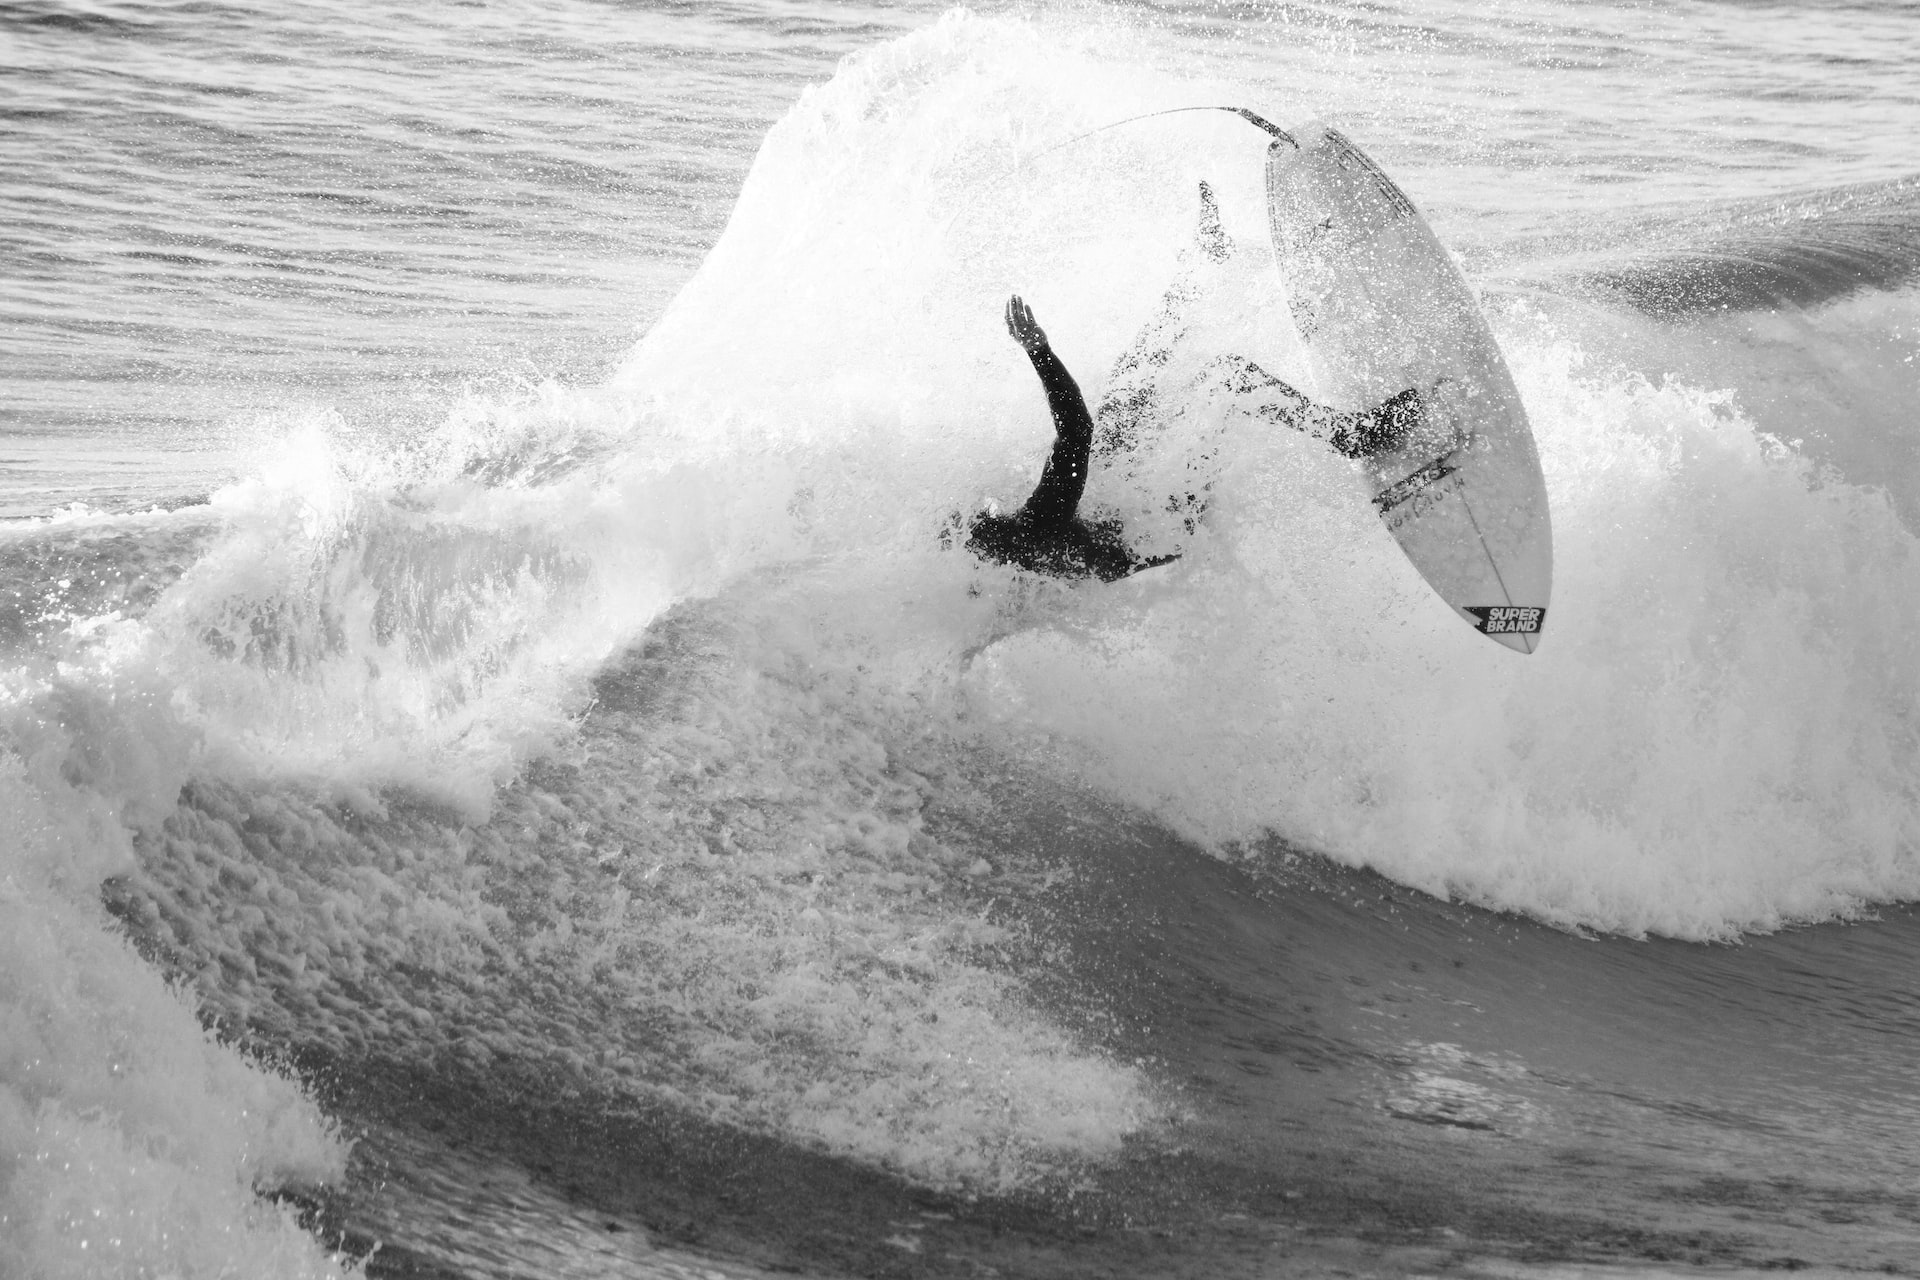 Black & white photo of a surfer falling off their board